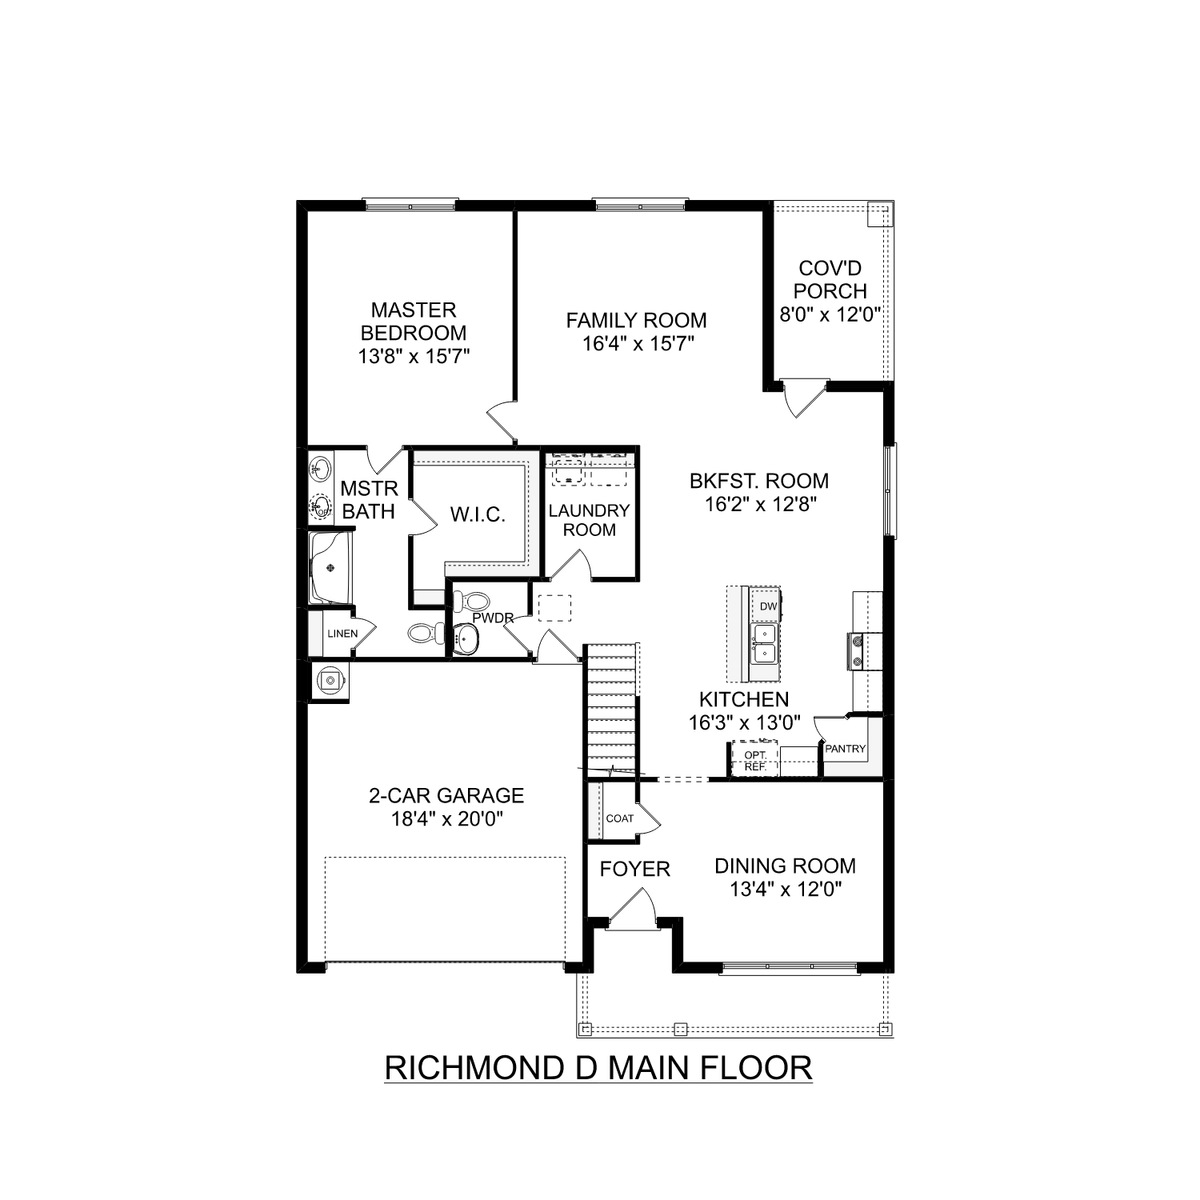 1 - The Richmond D buildable floor plan layout in Davidson Homes' Monteagle Cove community.